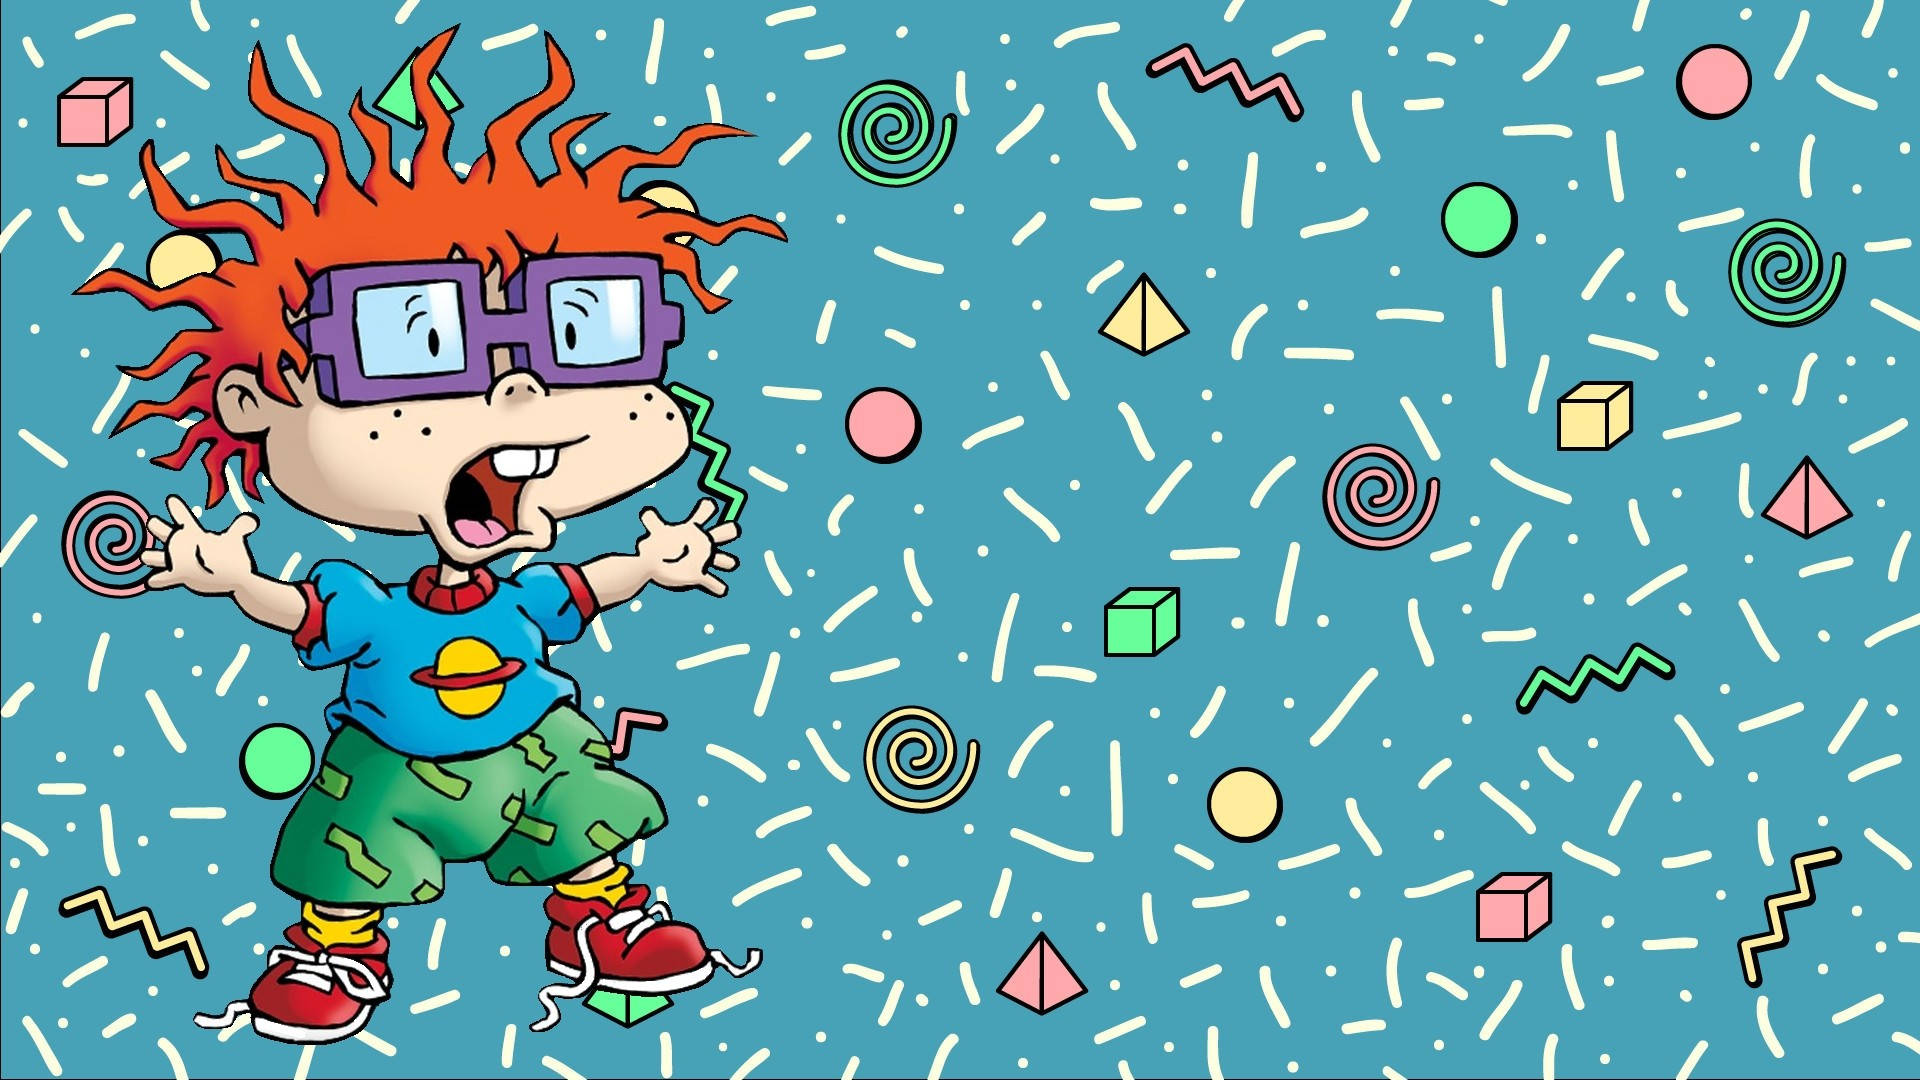 A Cartoon Character With Red Hair And Glasses